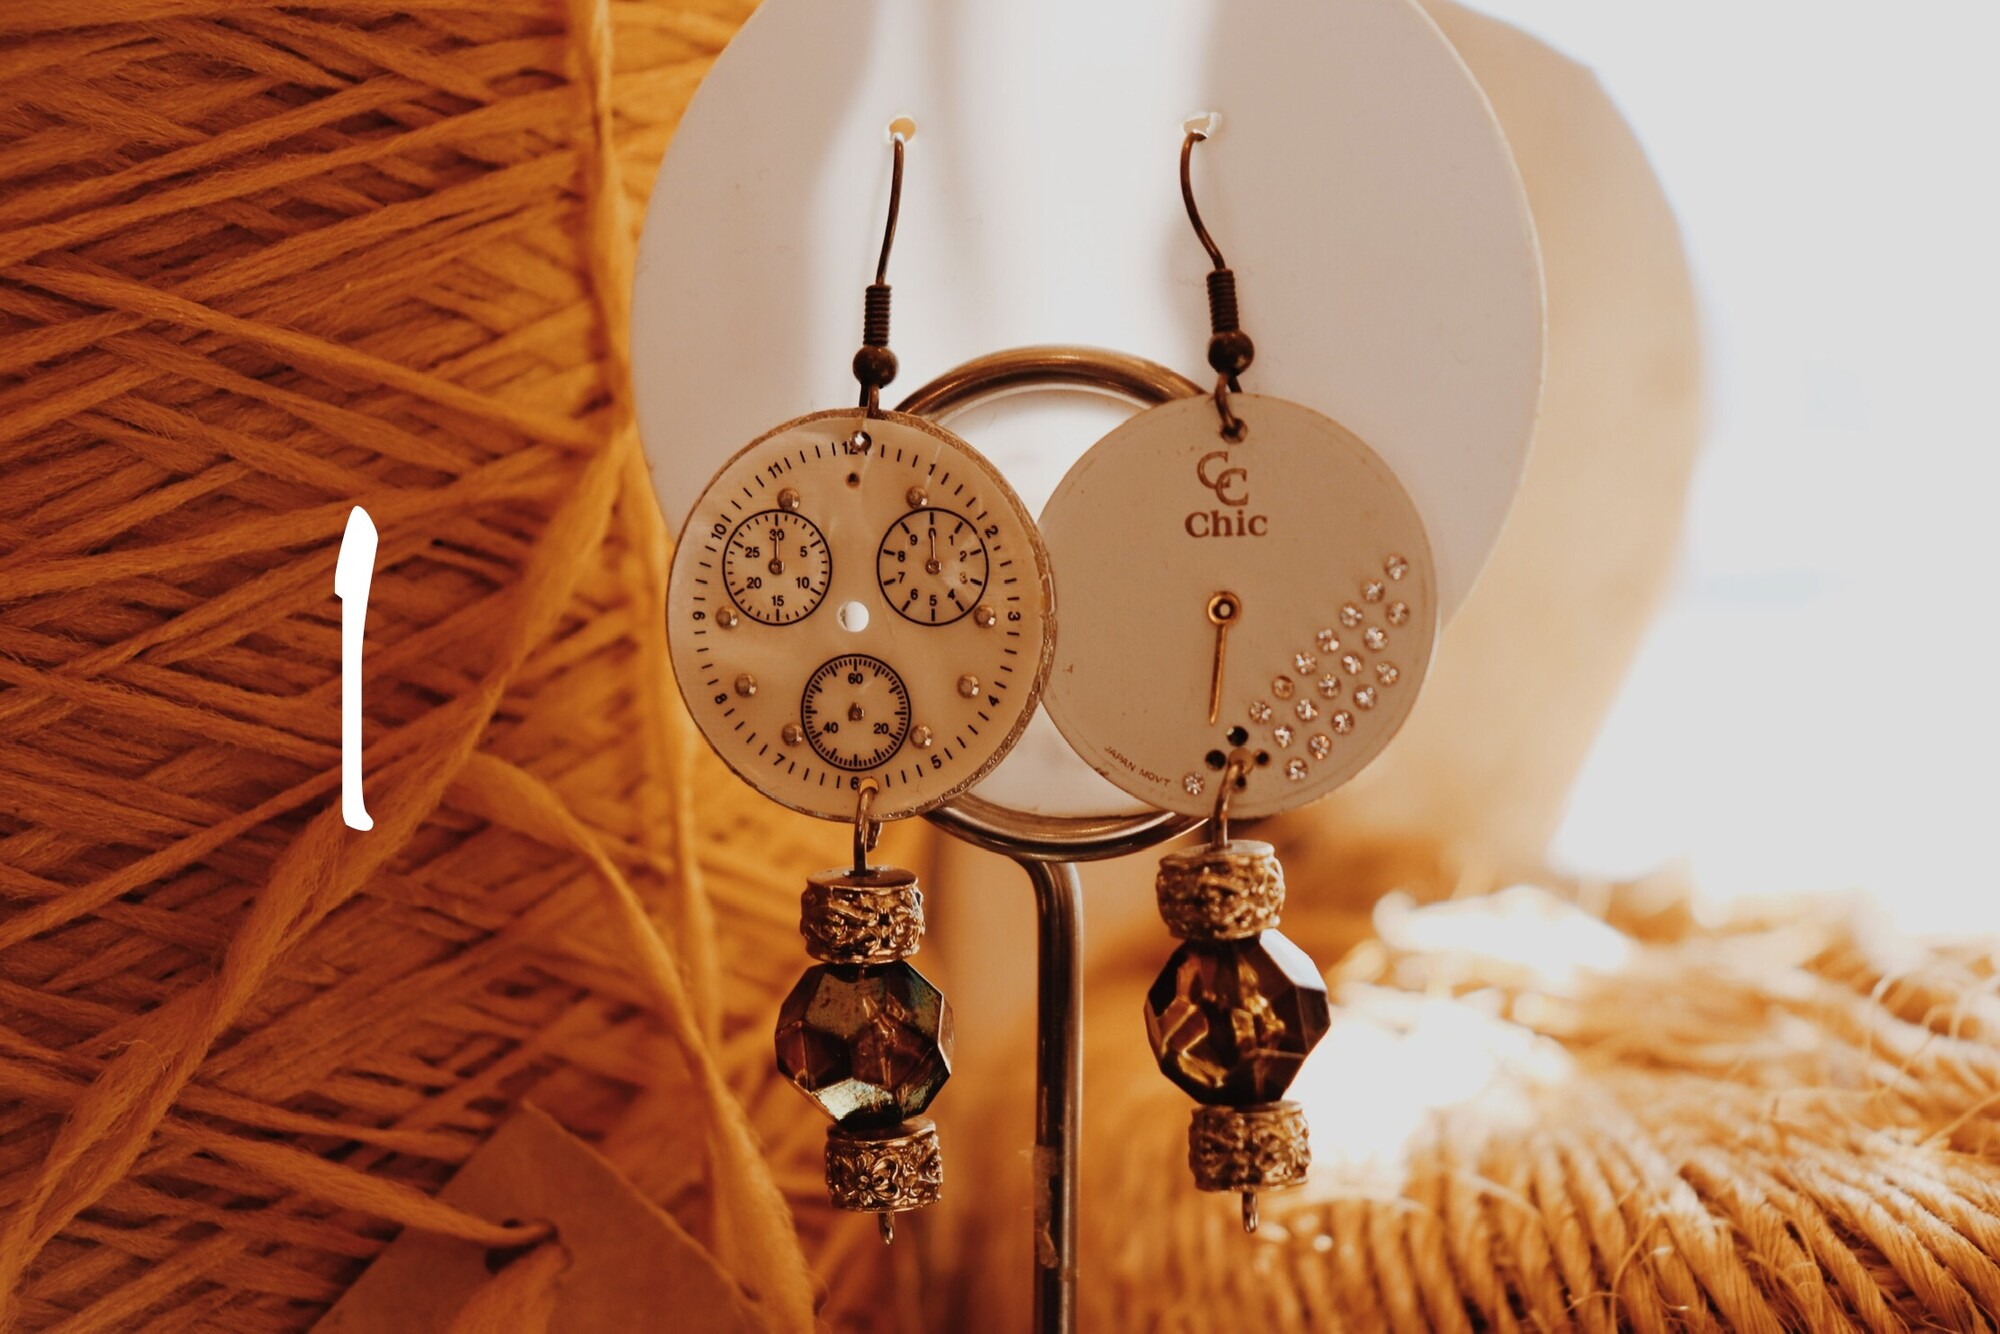 These handmade earrings made from watch faces are so unique! Select the number that matches your preferred earrings.